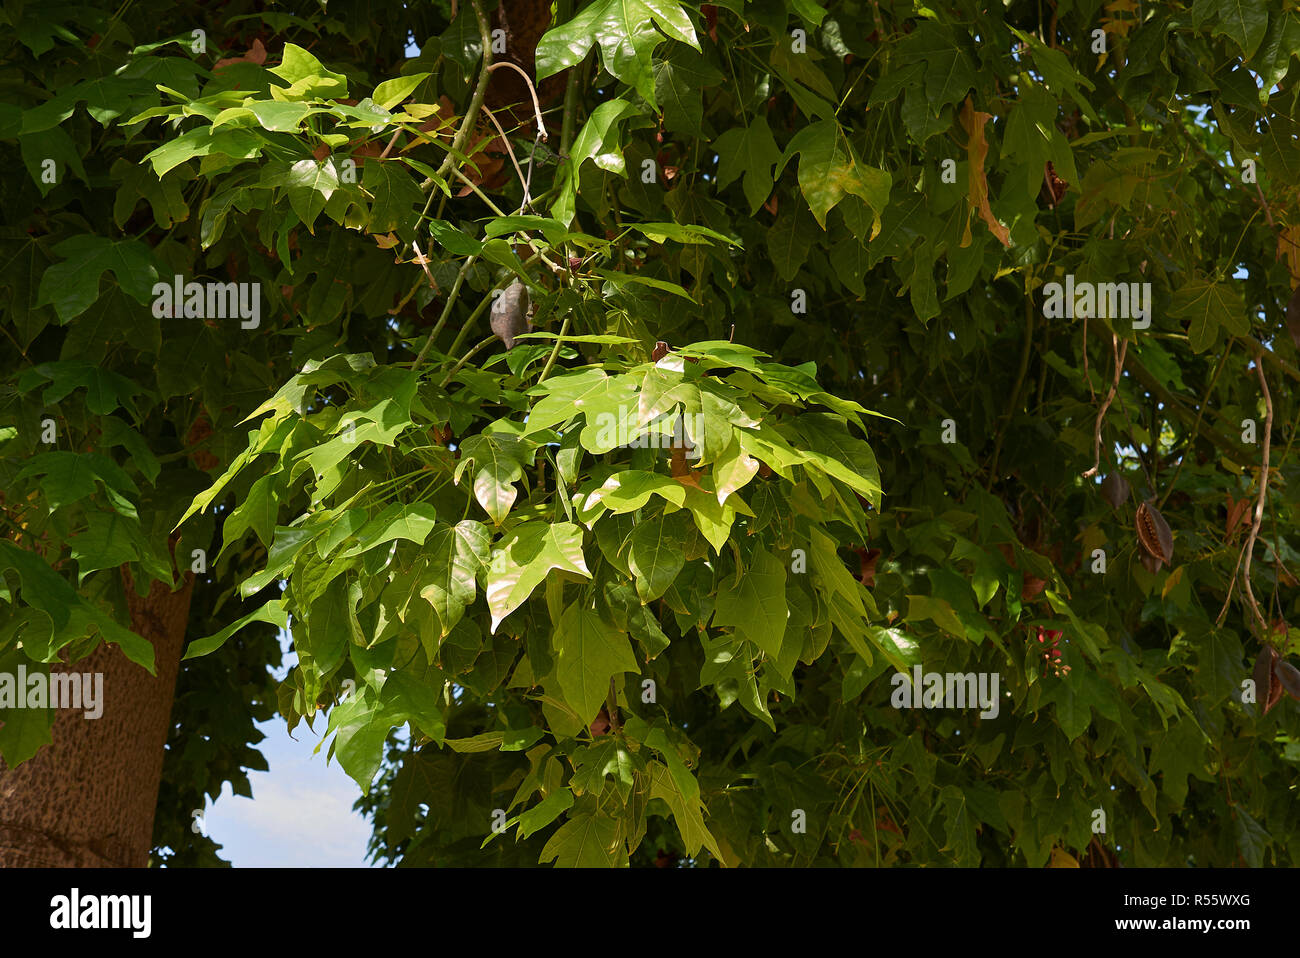 branch of Brachychiton acerifolius tree with fruit and flowers Stock Photo